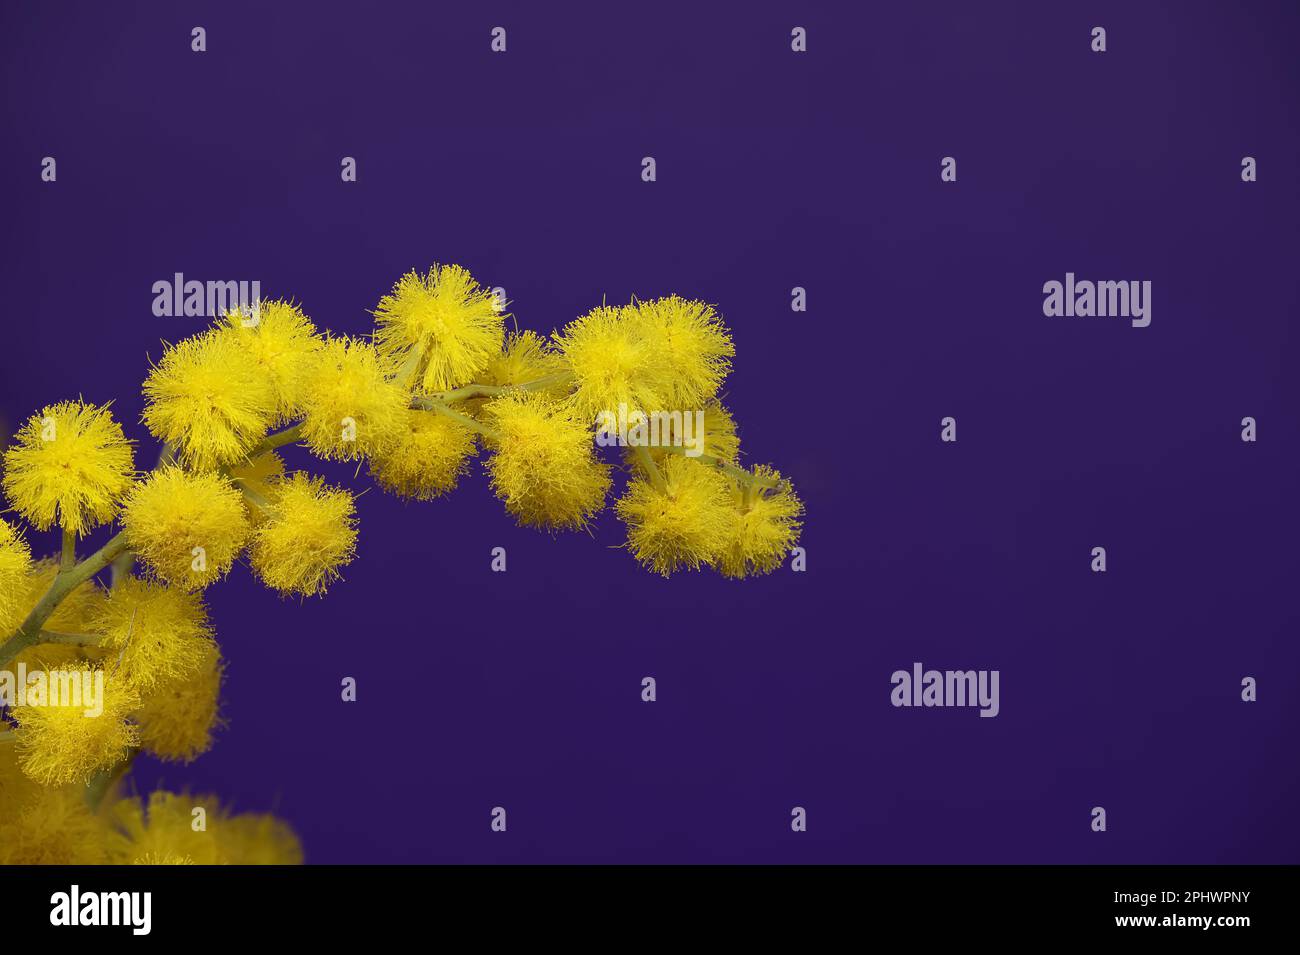 Acacia dealbata yellow fluffy balls and leaves in close-up over blue background. Mimosa (silver wattle) branch Stock Photo